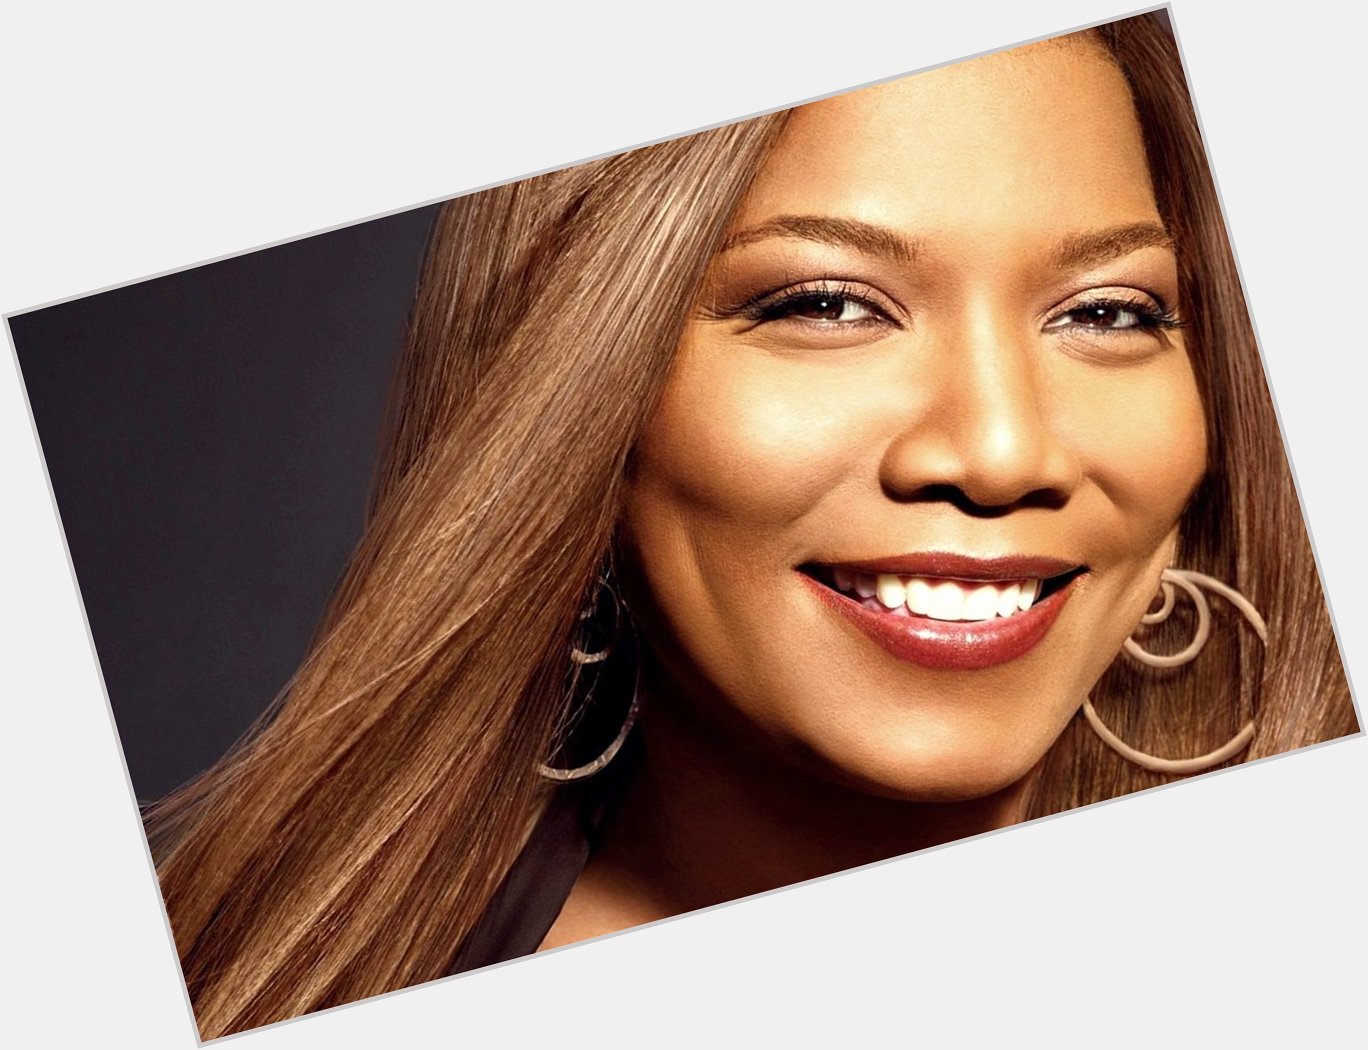 Happy birthday to Queen Latifah! Consider adopting a \royal\ word in her honor:  